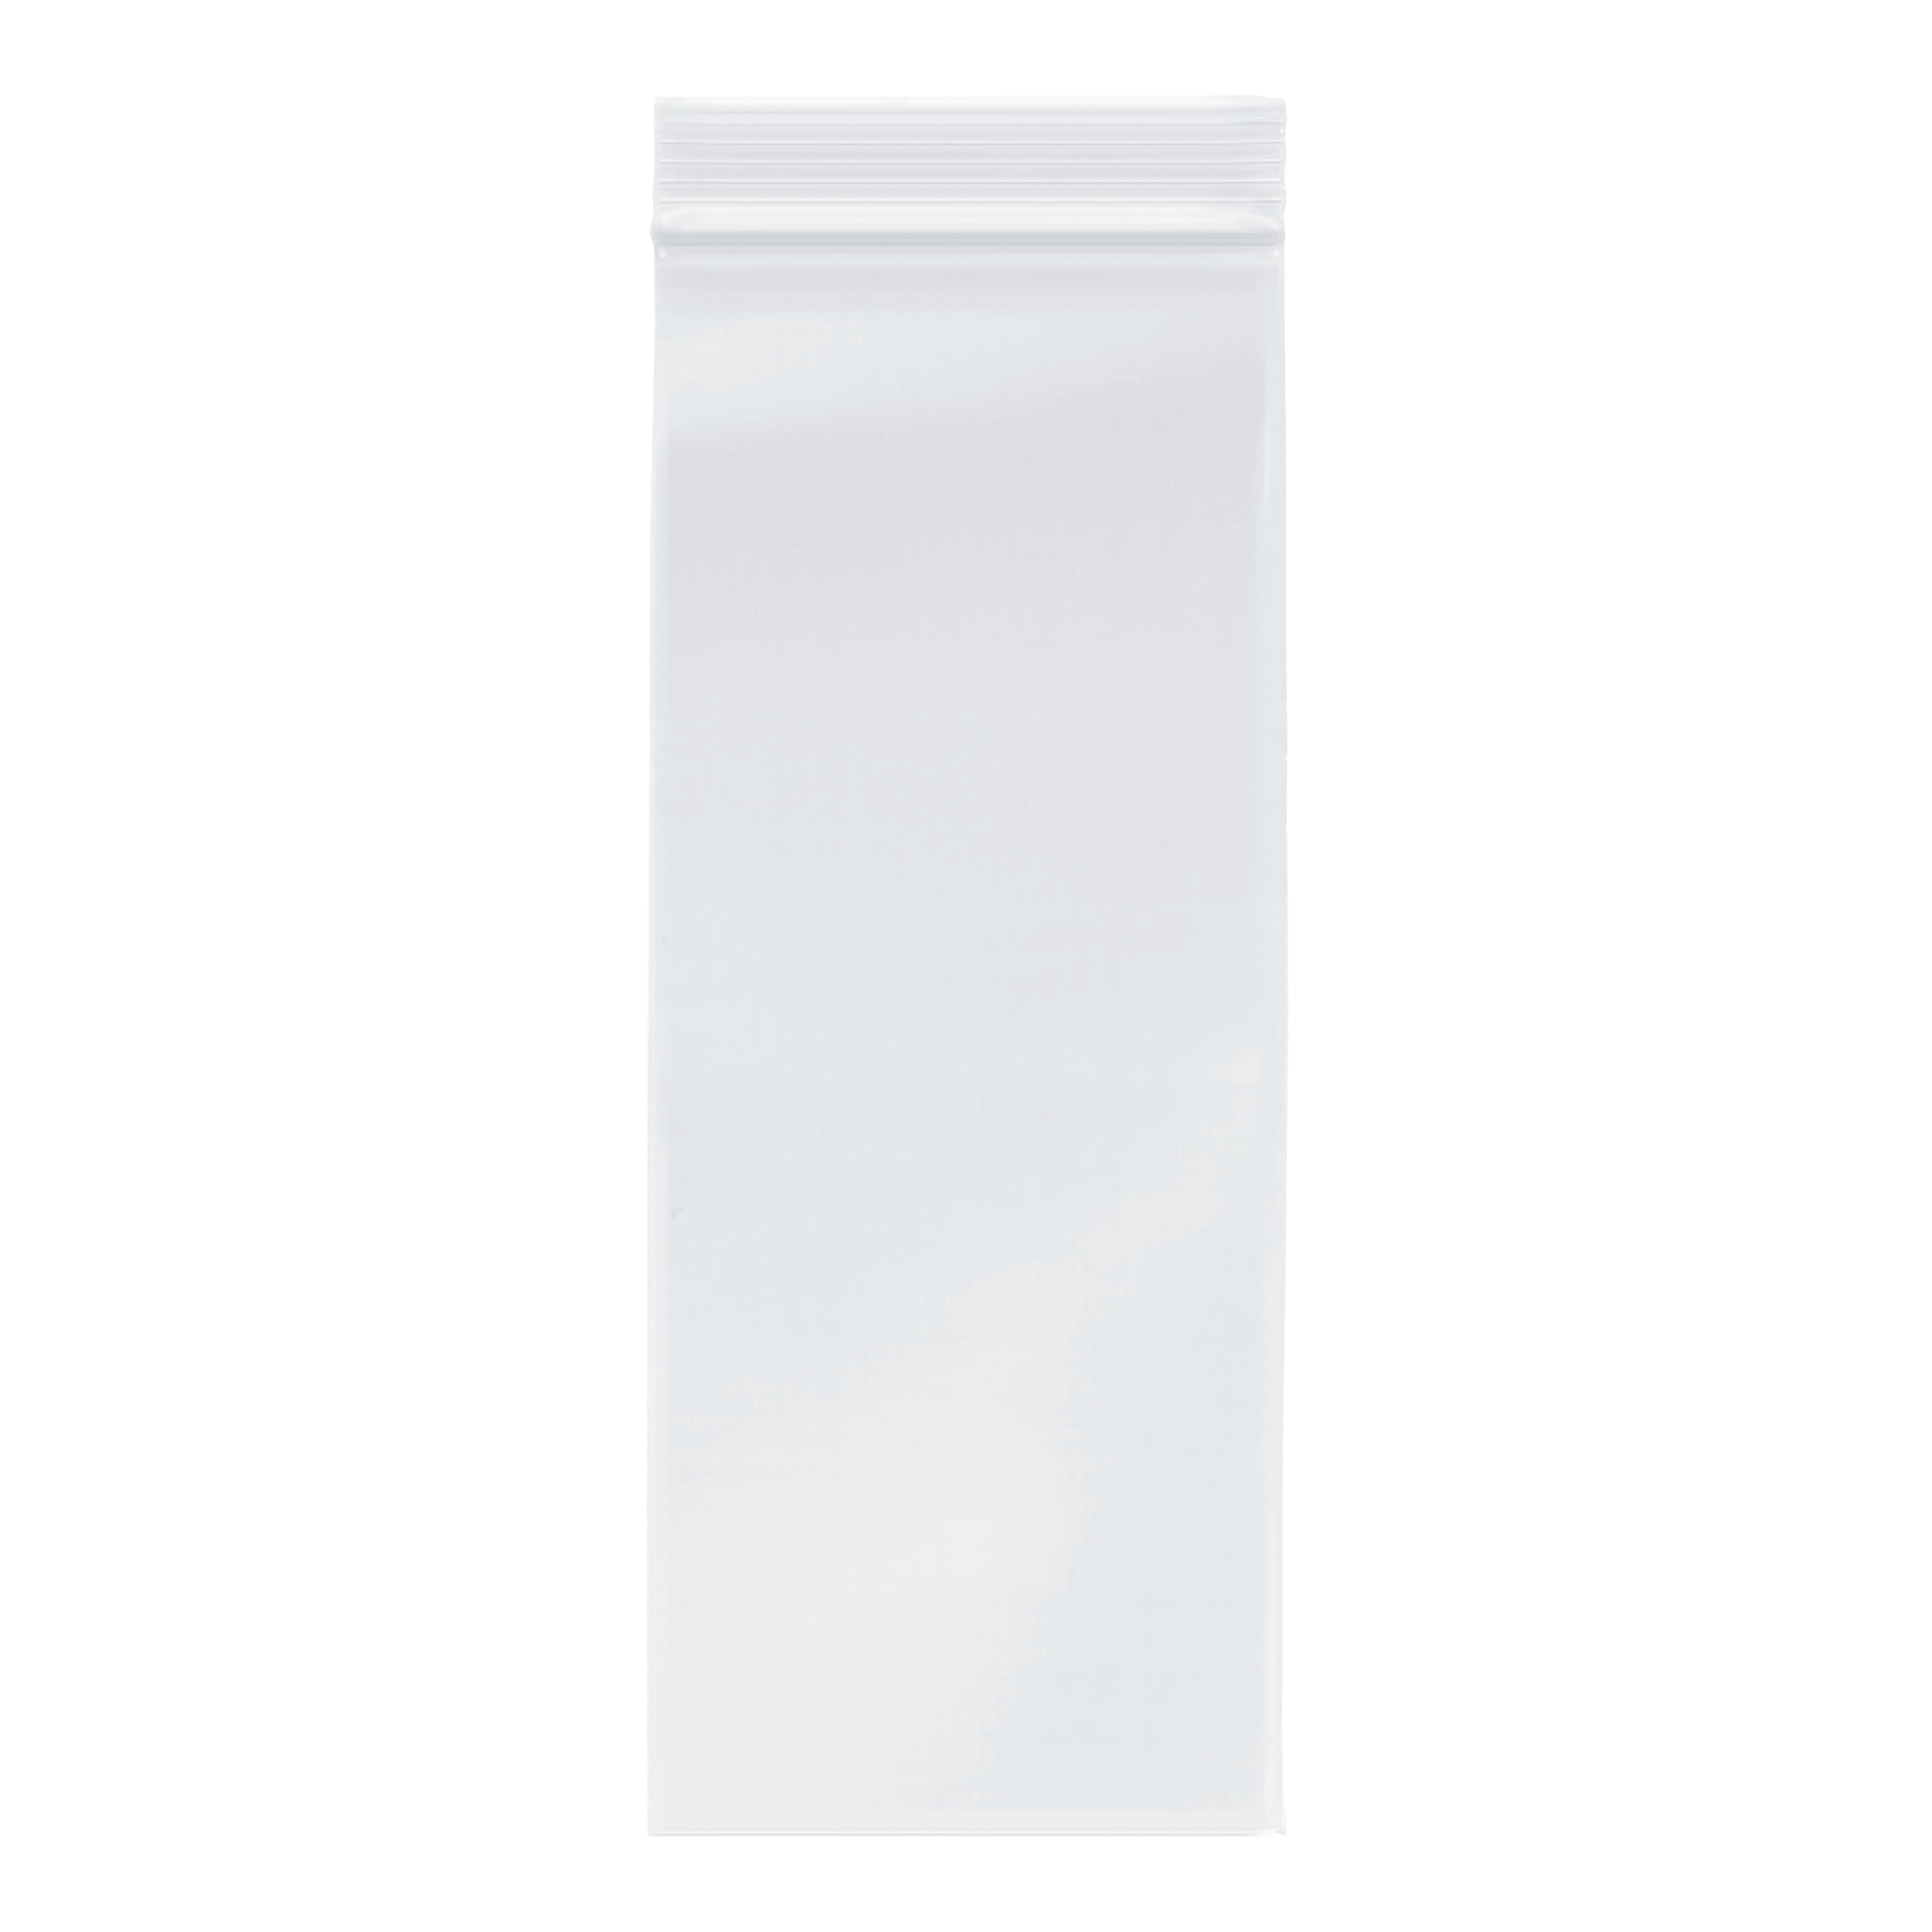 100-4-3/8"X9-1/2"CLEAR LIP & TAPE SELF SEALING RECLOSABLE CELLO BAGS 